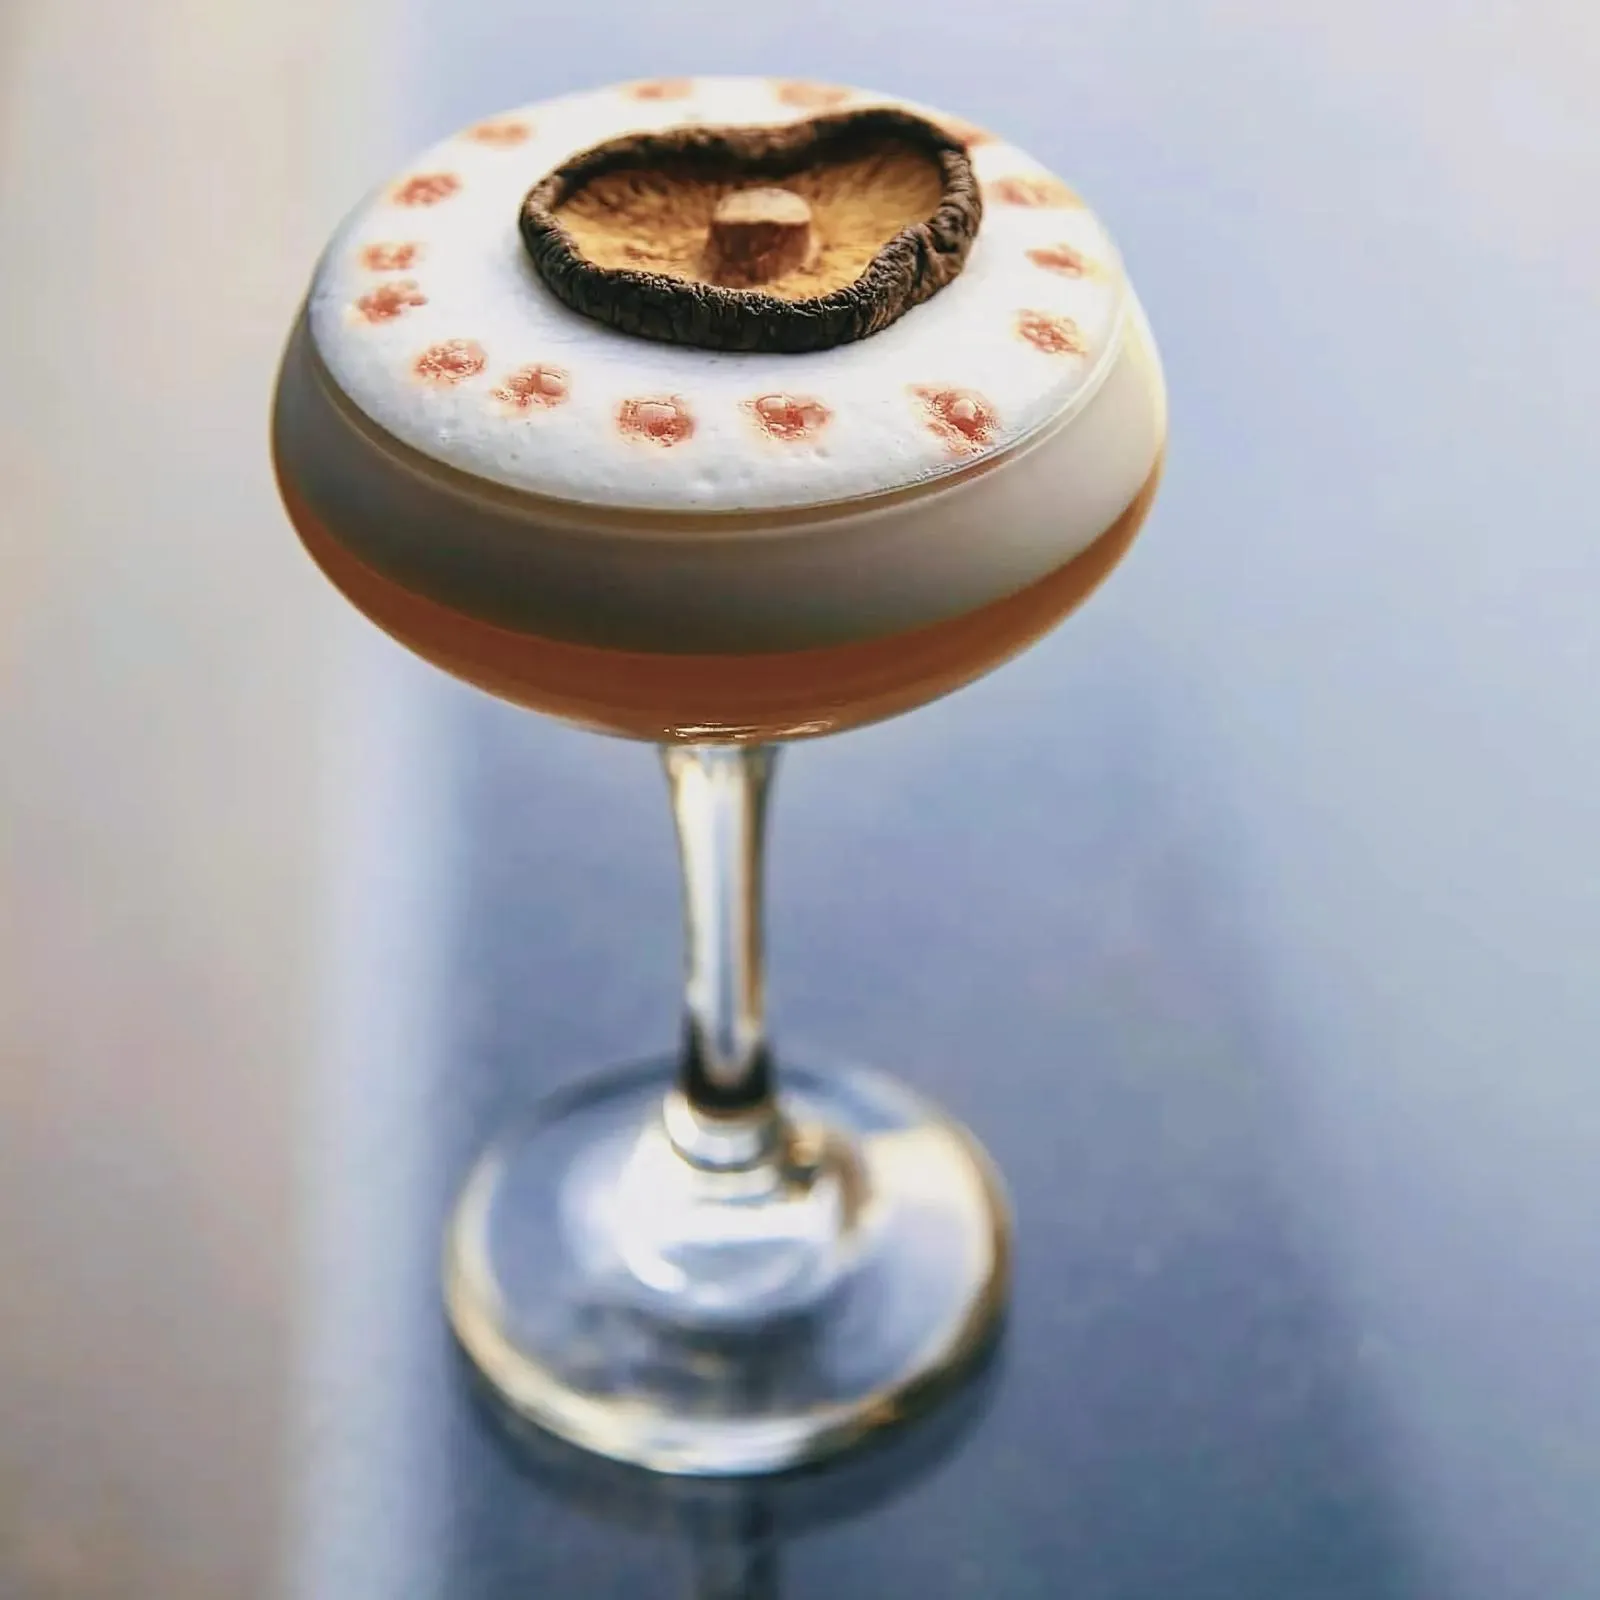 Tall glass filled with a rich brown cocktail and a cookie balanced on top.